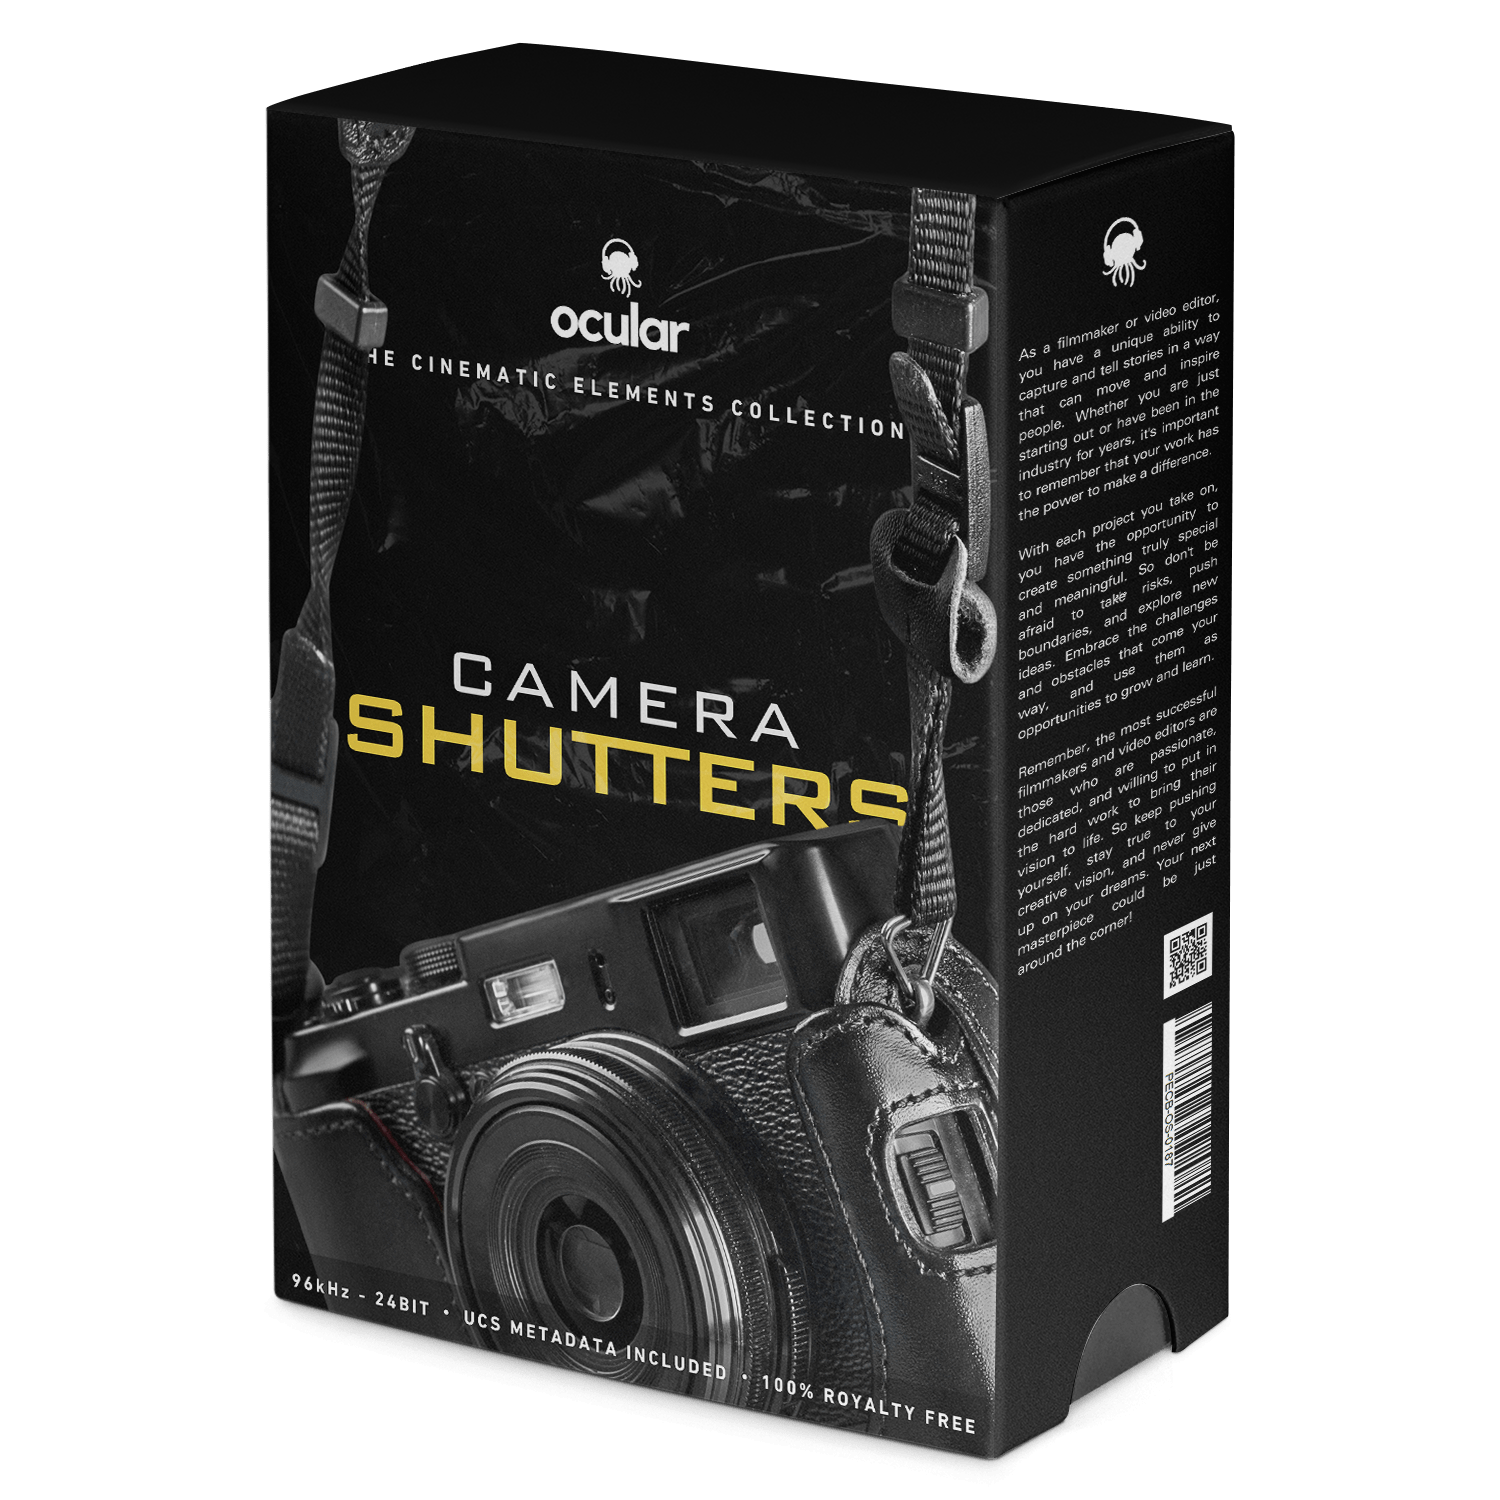  Camera Shutters Sound Effects for Video Editing. Professional Sound FX Library.